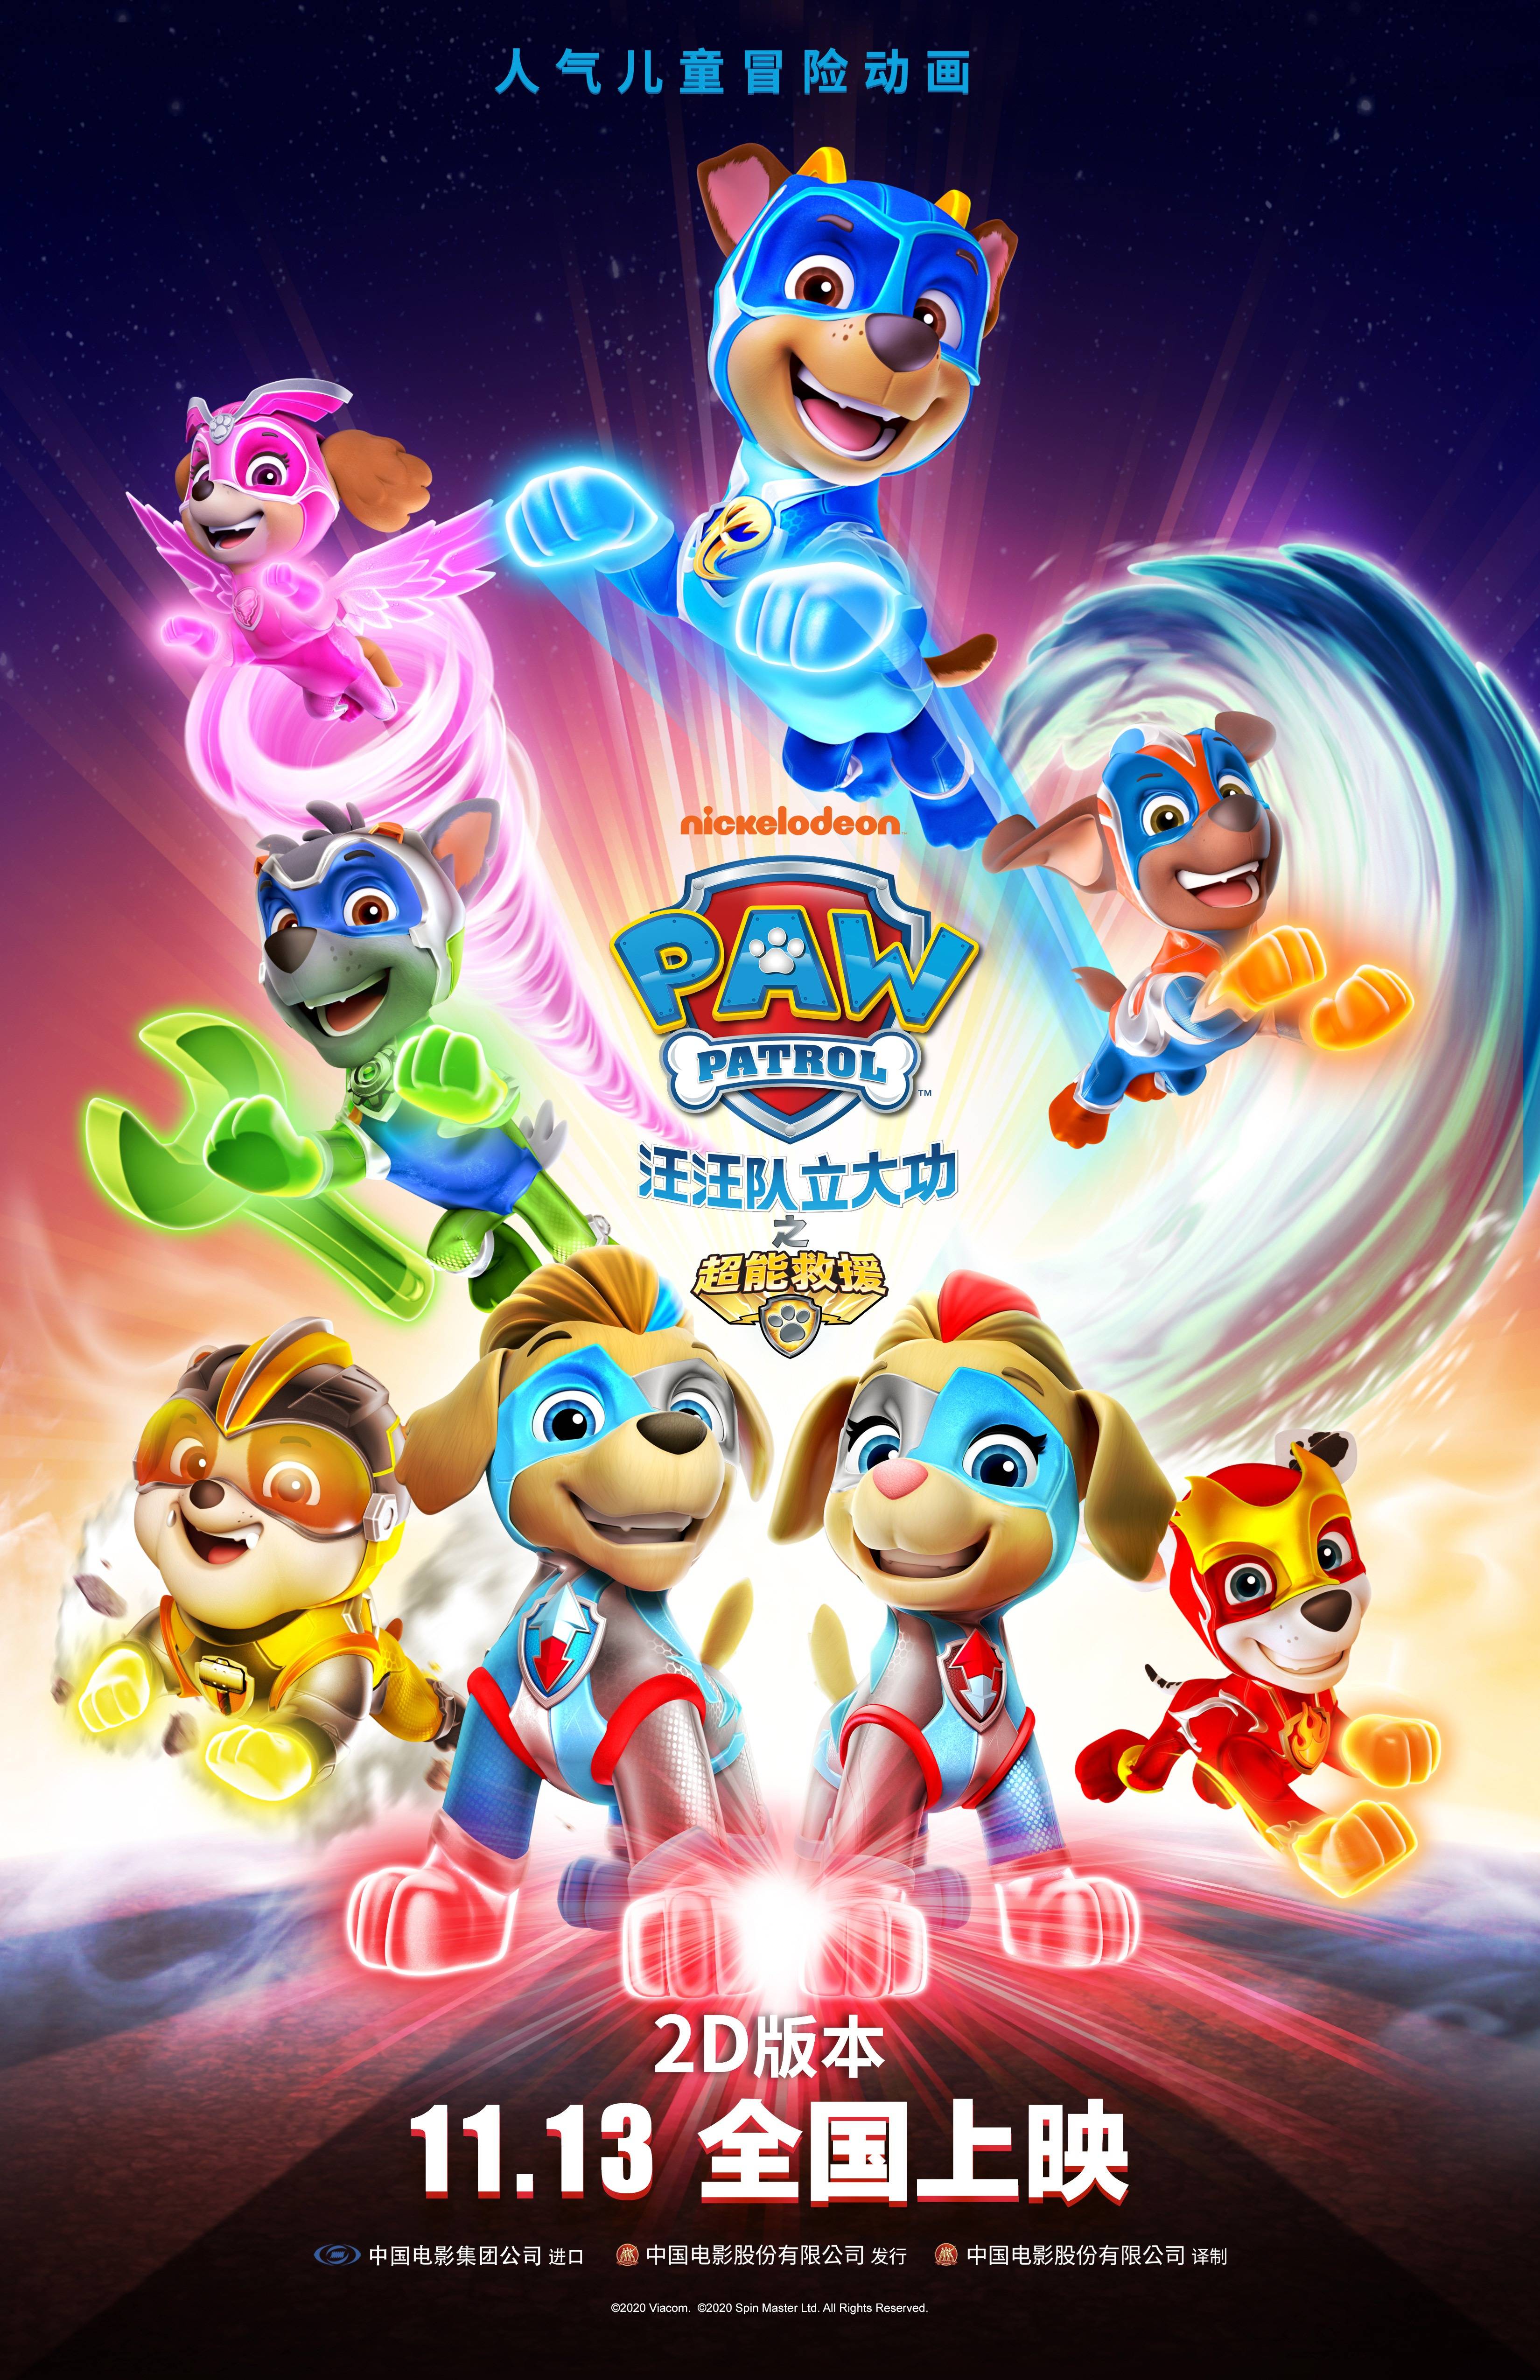 Paw Patrol 2021 Wallpapers - Wallpaper Cave 5F4